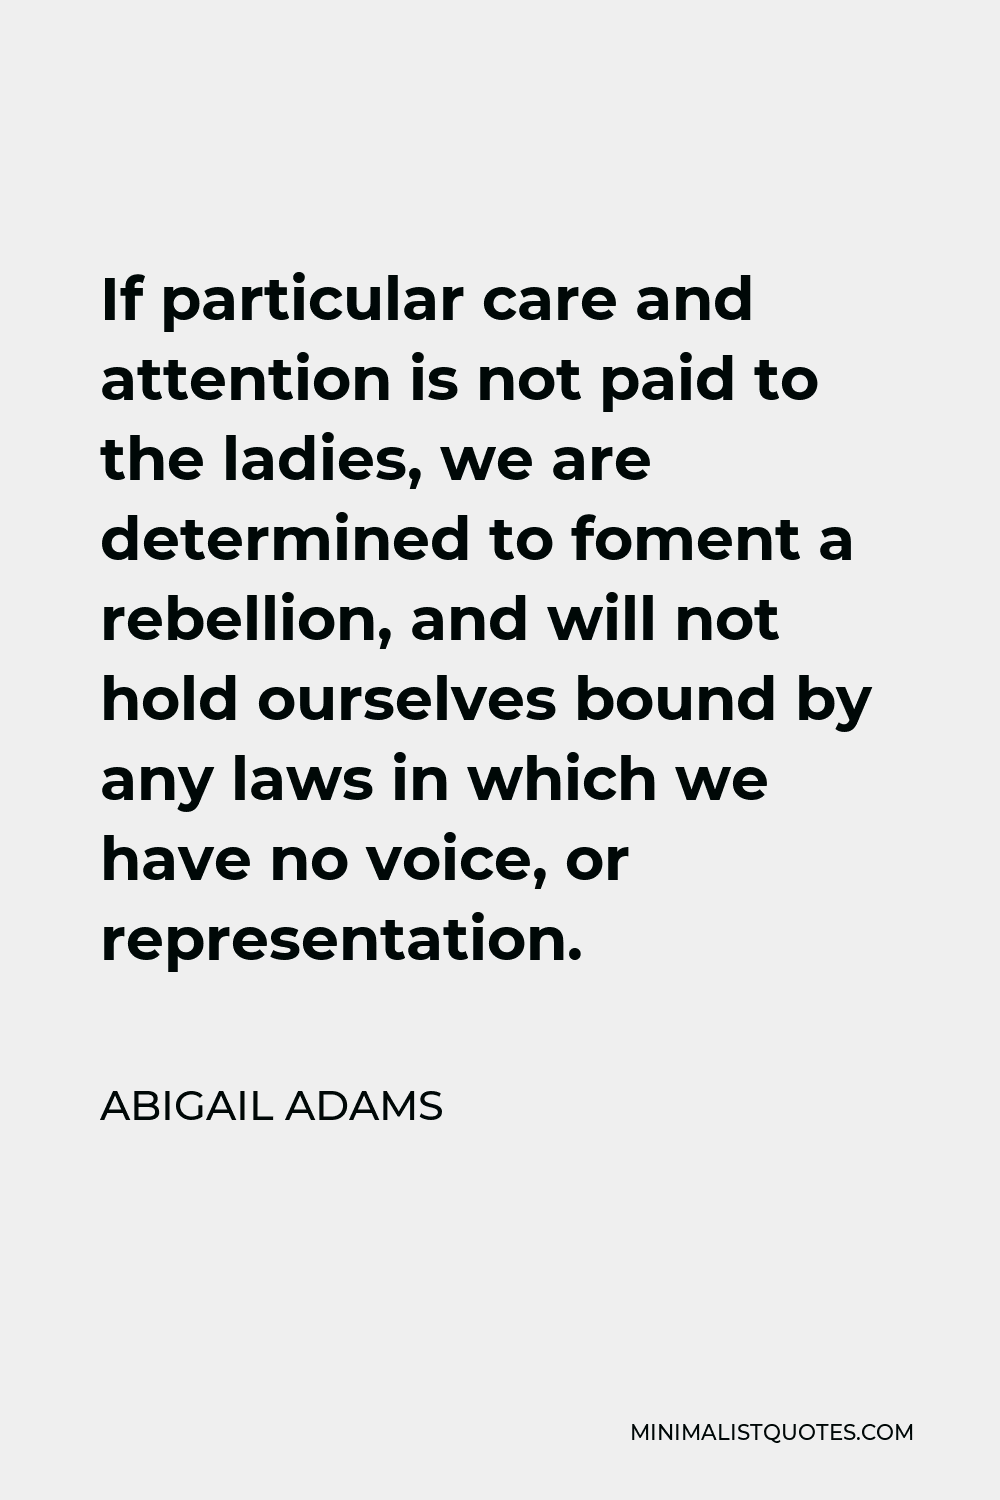 Abigail Adams Quote - If particular care and attention is not paid to the ladies, we are determined to foment a rebellion, and will not hold ourselves bound by any laws in which we have no voice, or representation.